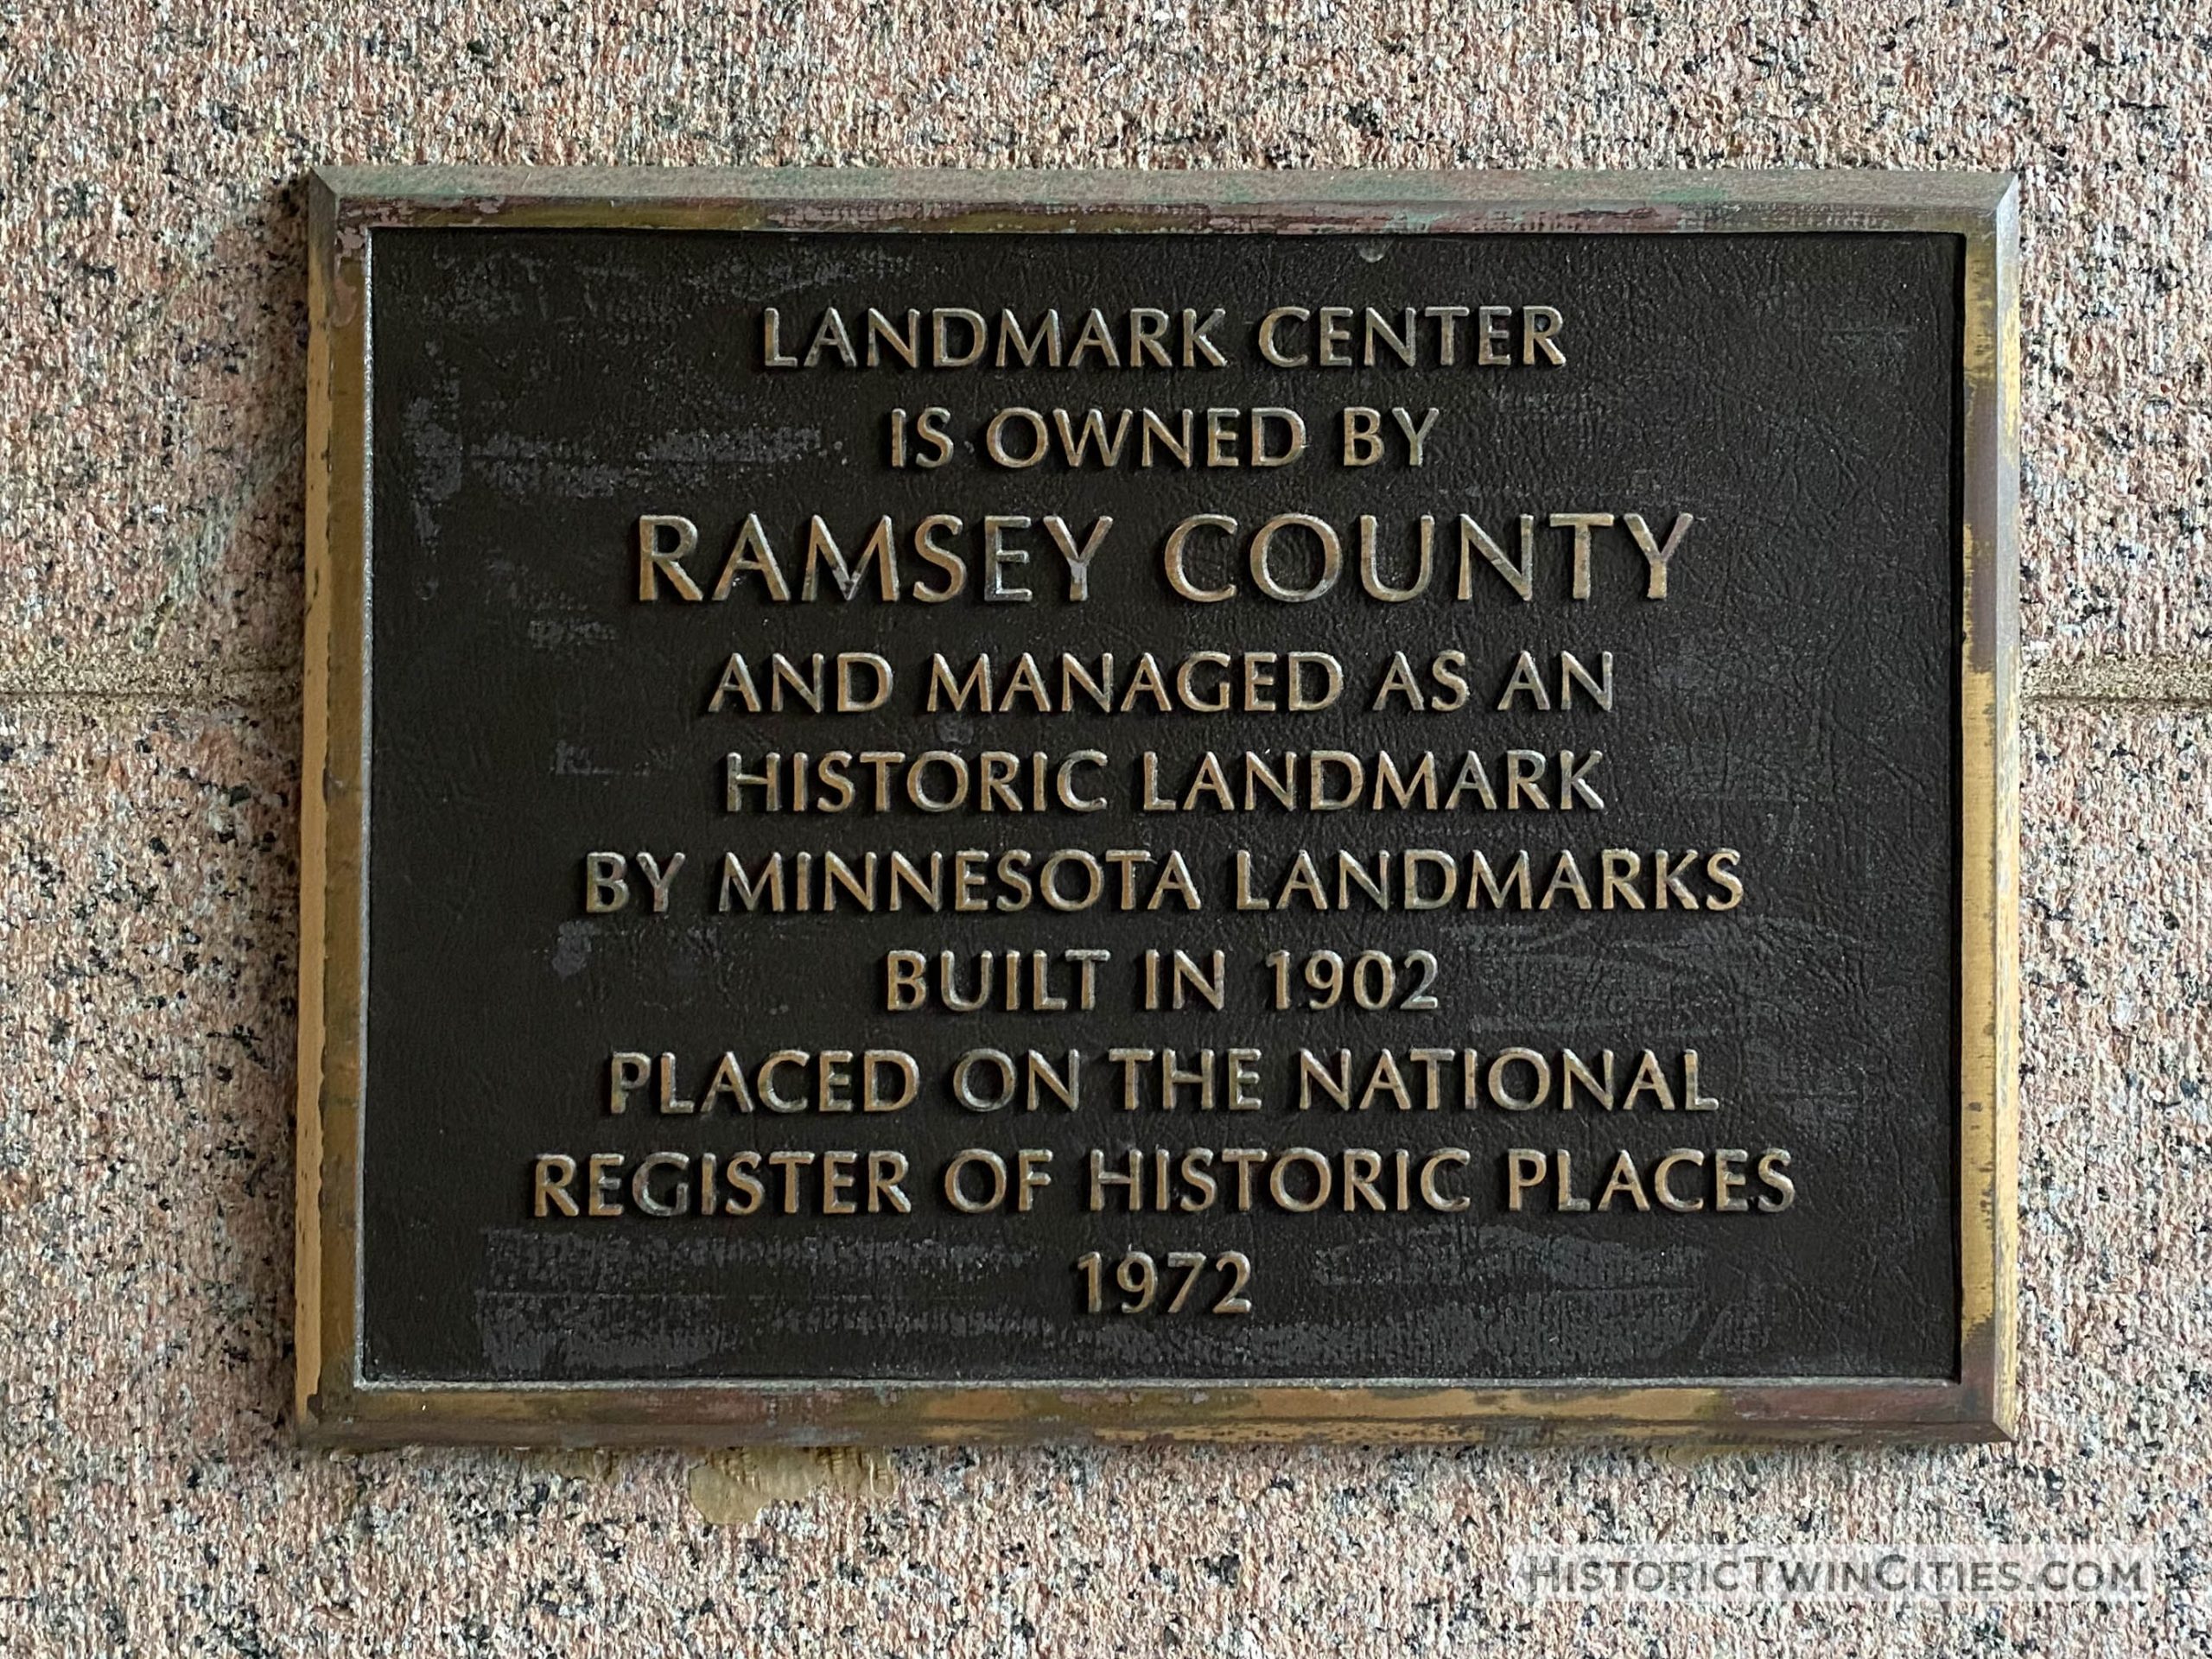 National Register of Historic Places plaque on the Landmark Center in St. Paul, MN